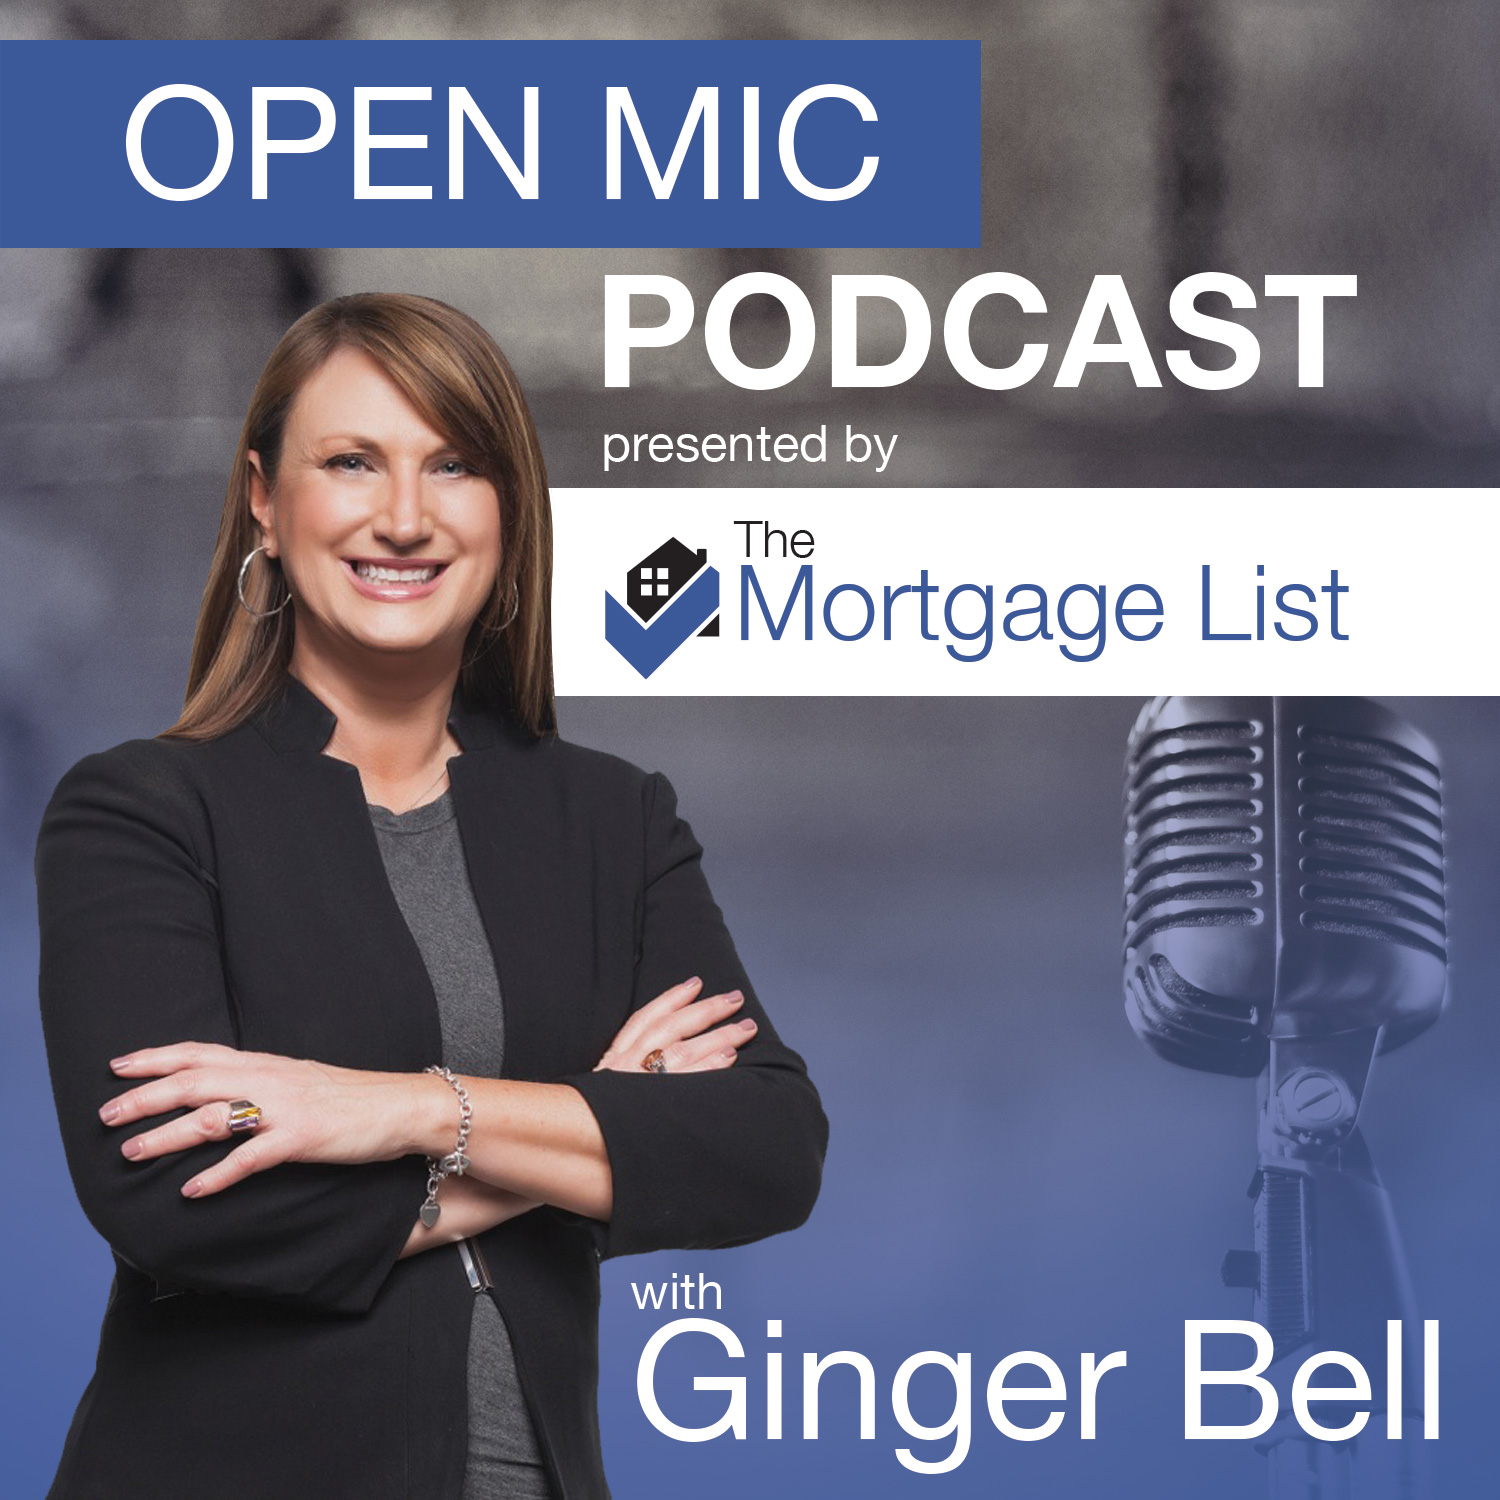 The Mortgage List LLC has announced its official launch of their podcast, “Open Mic With The Mortgage List.”